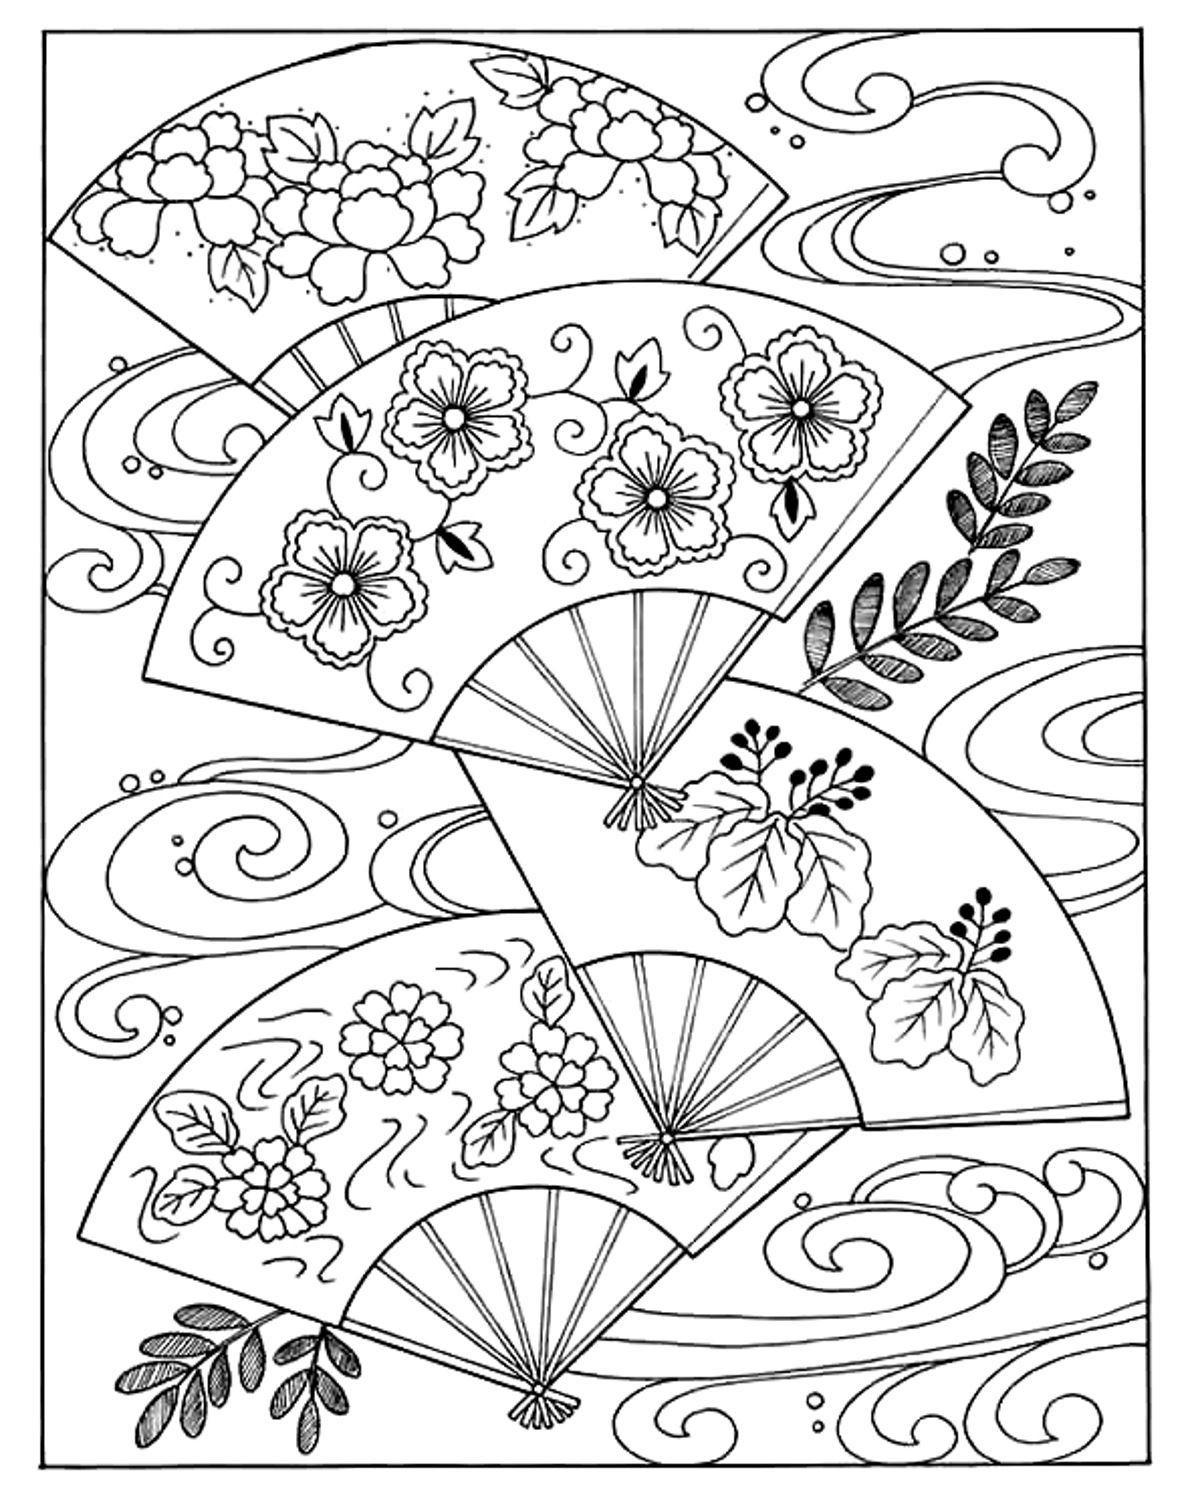 16 Coloring Pages For Adults Japanese